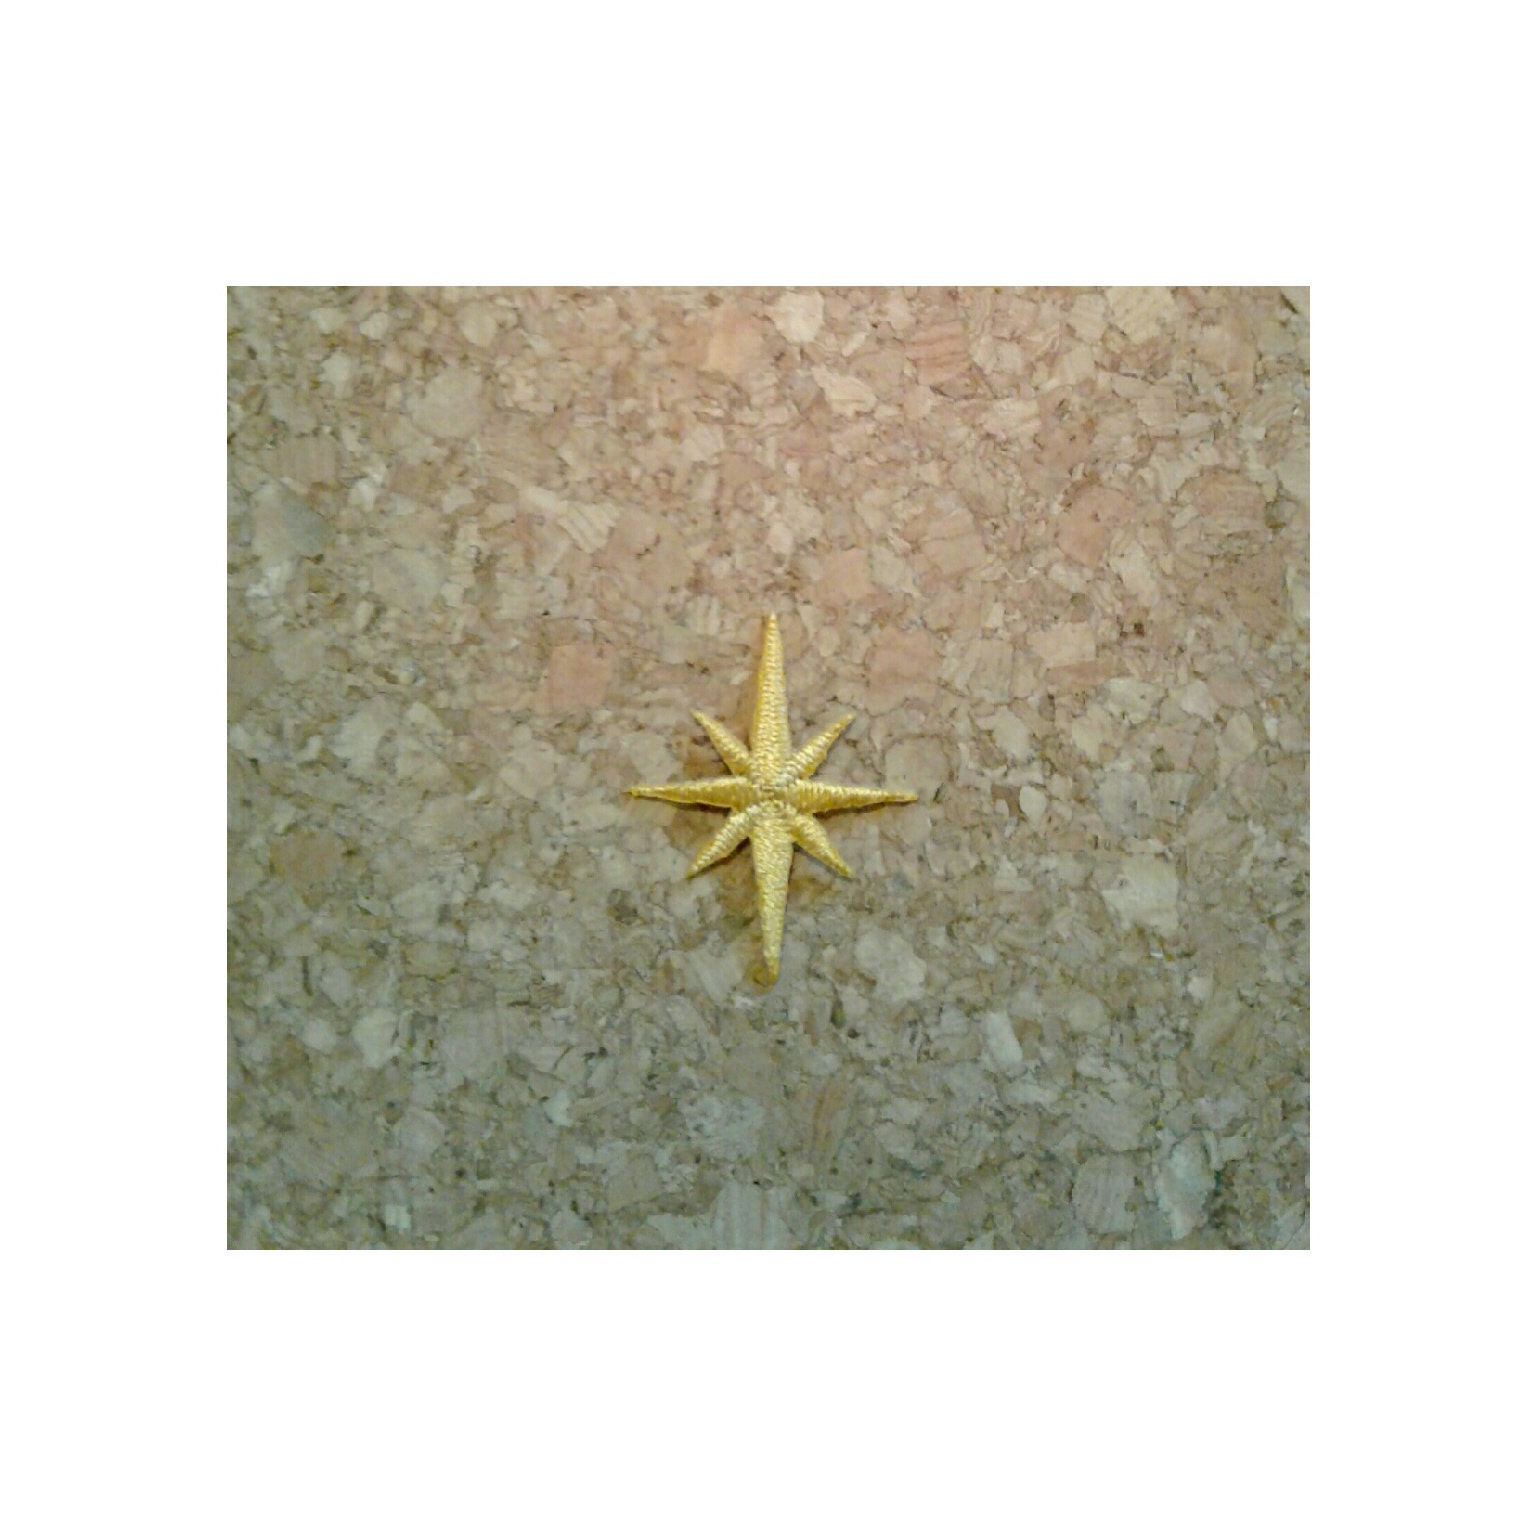 Gold Star Sticker Patch – These Are Things